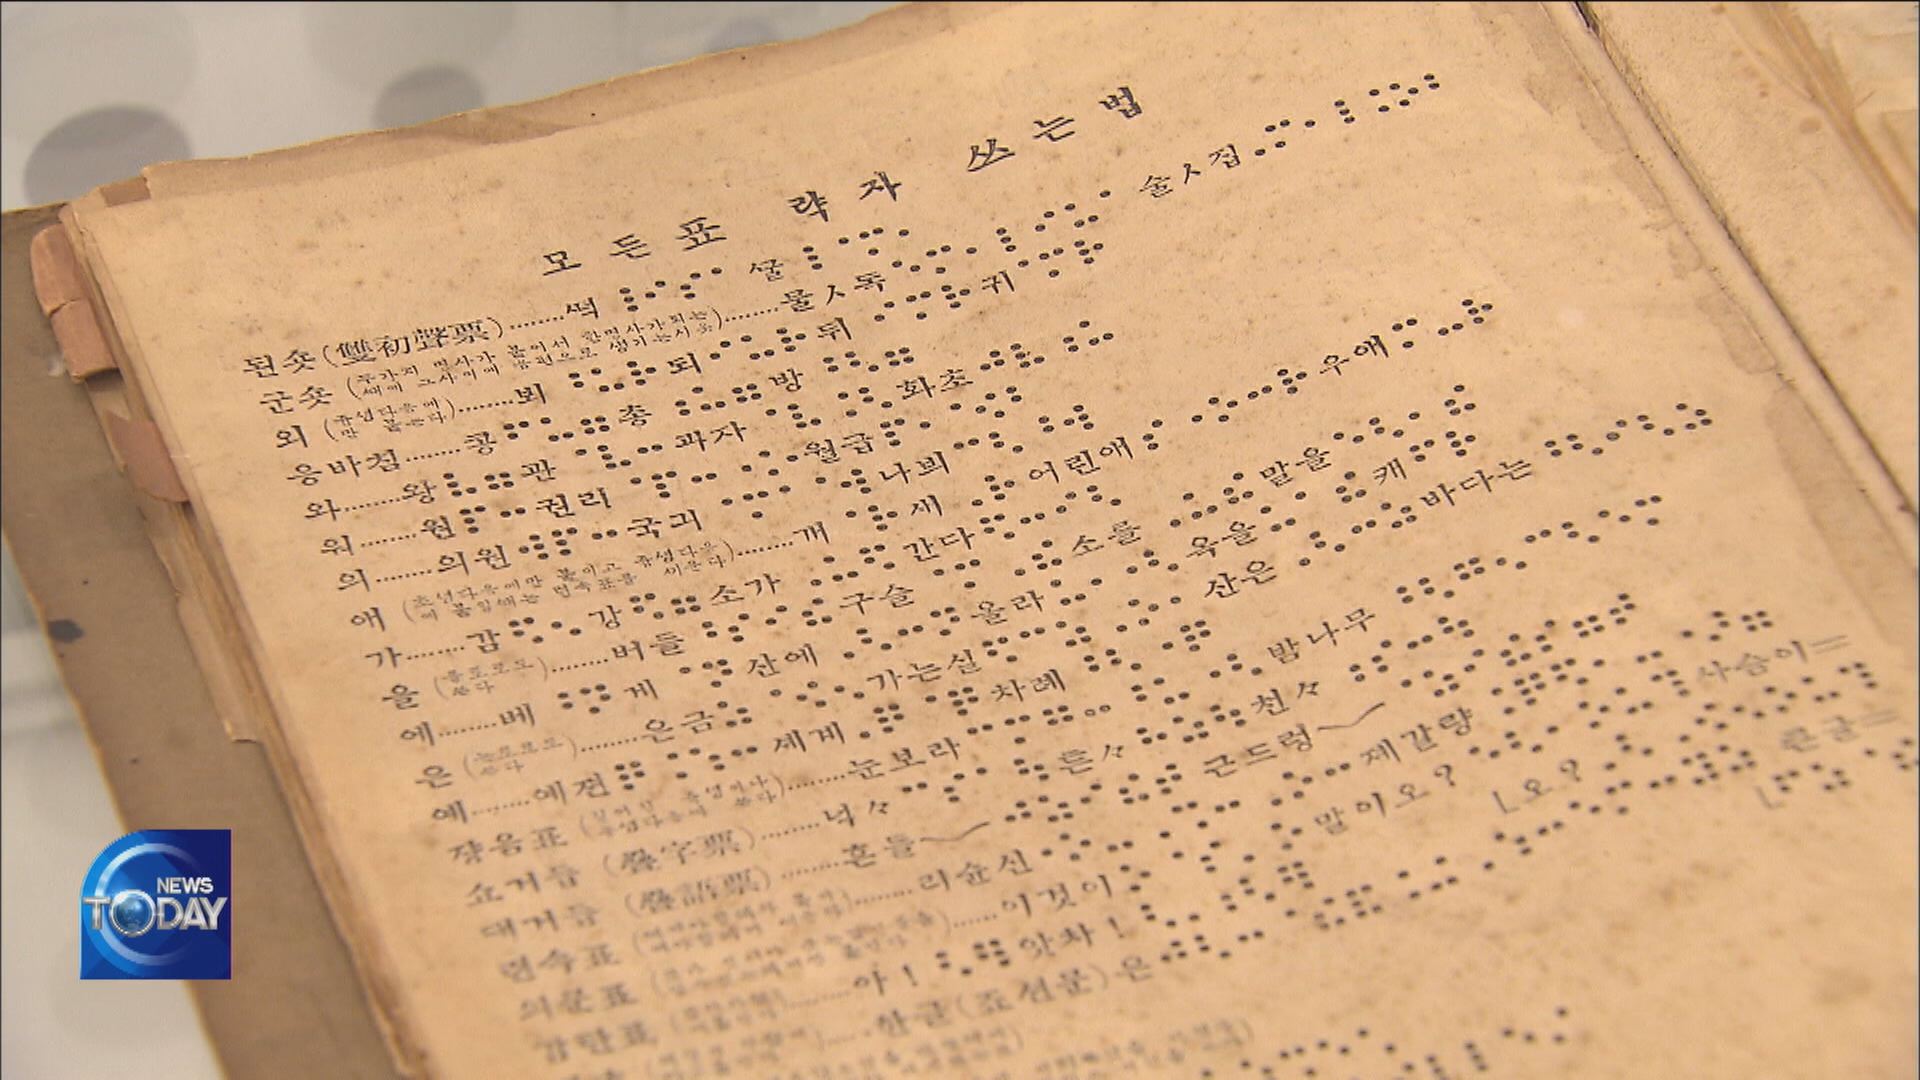 BRAILLE SYSTEM BECOMES STATE CULTURAL ASSET